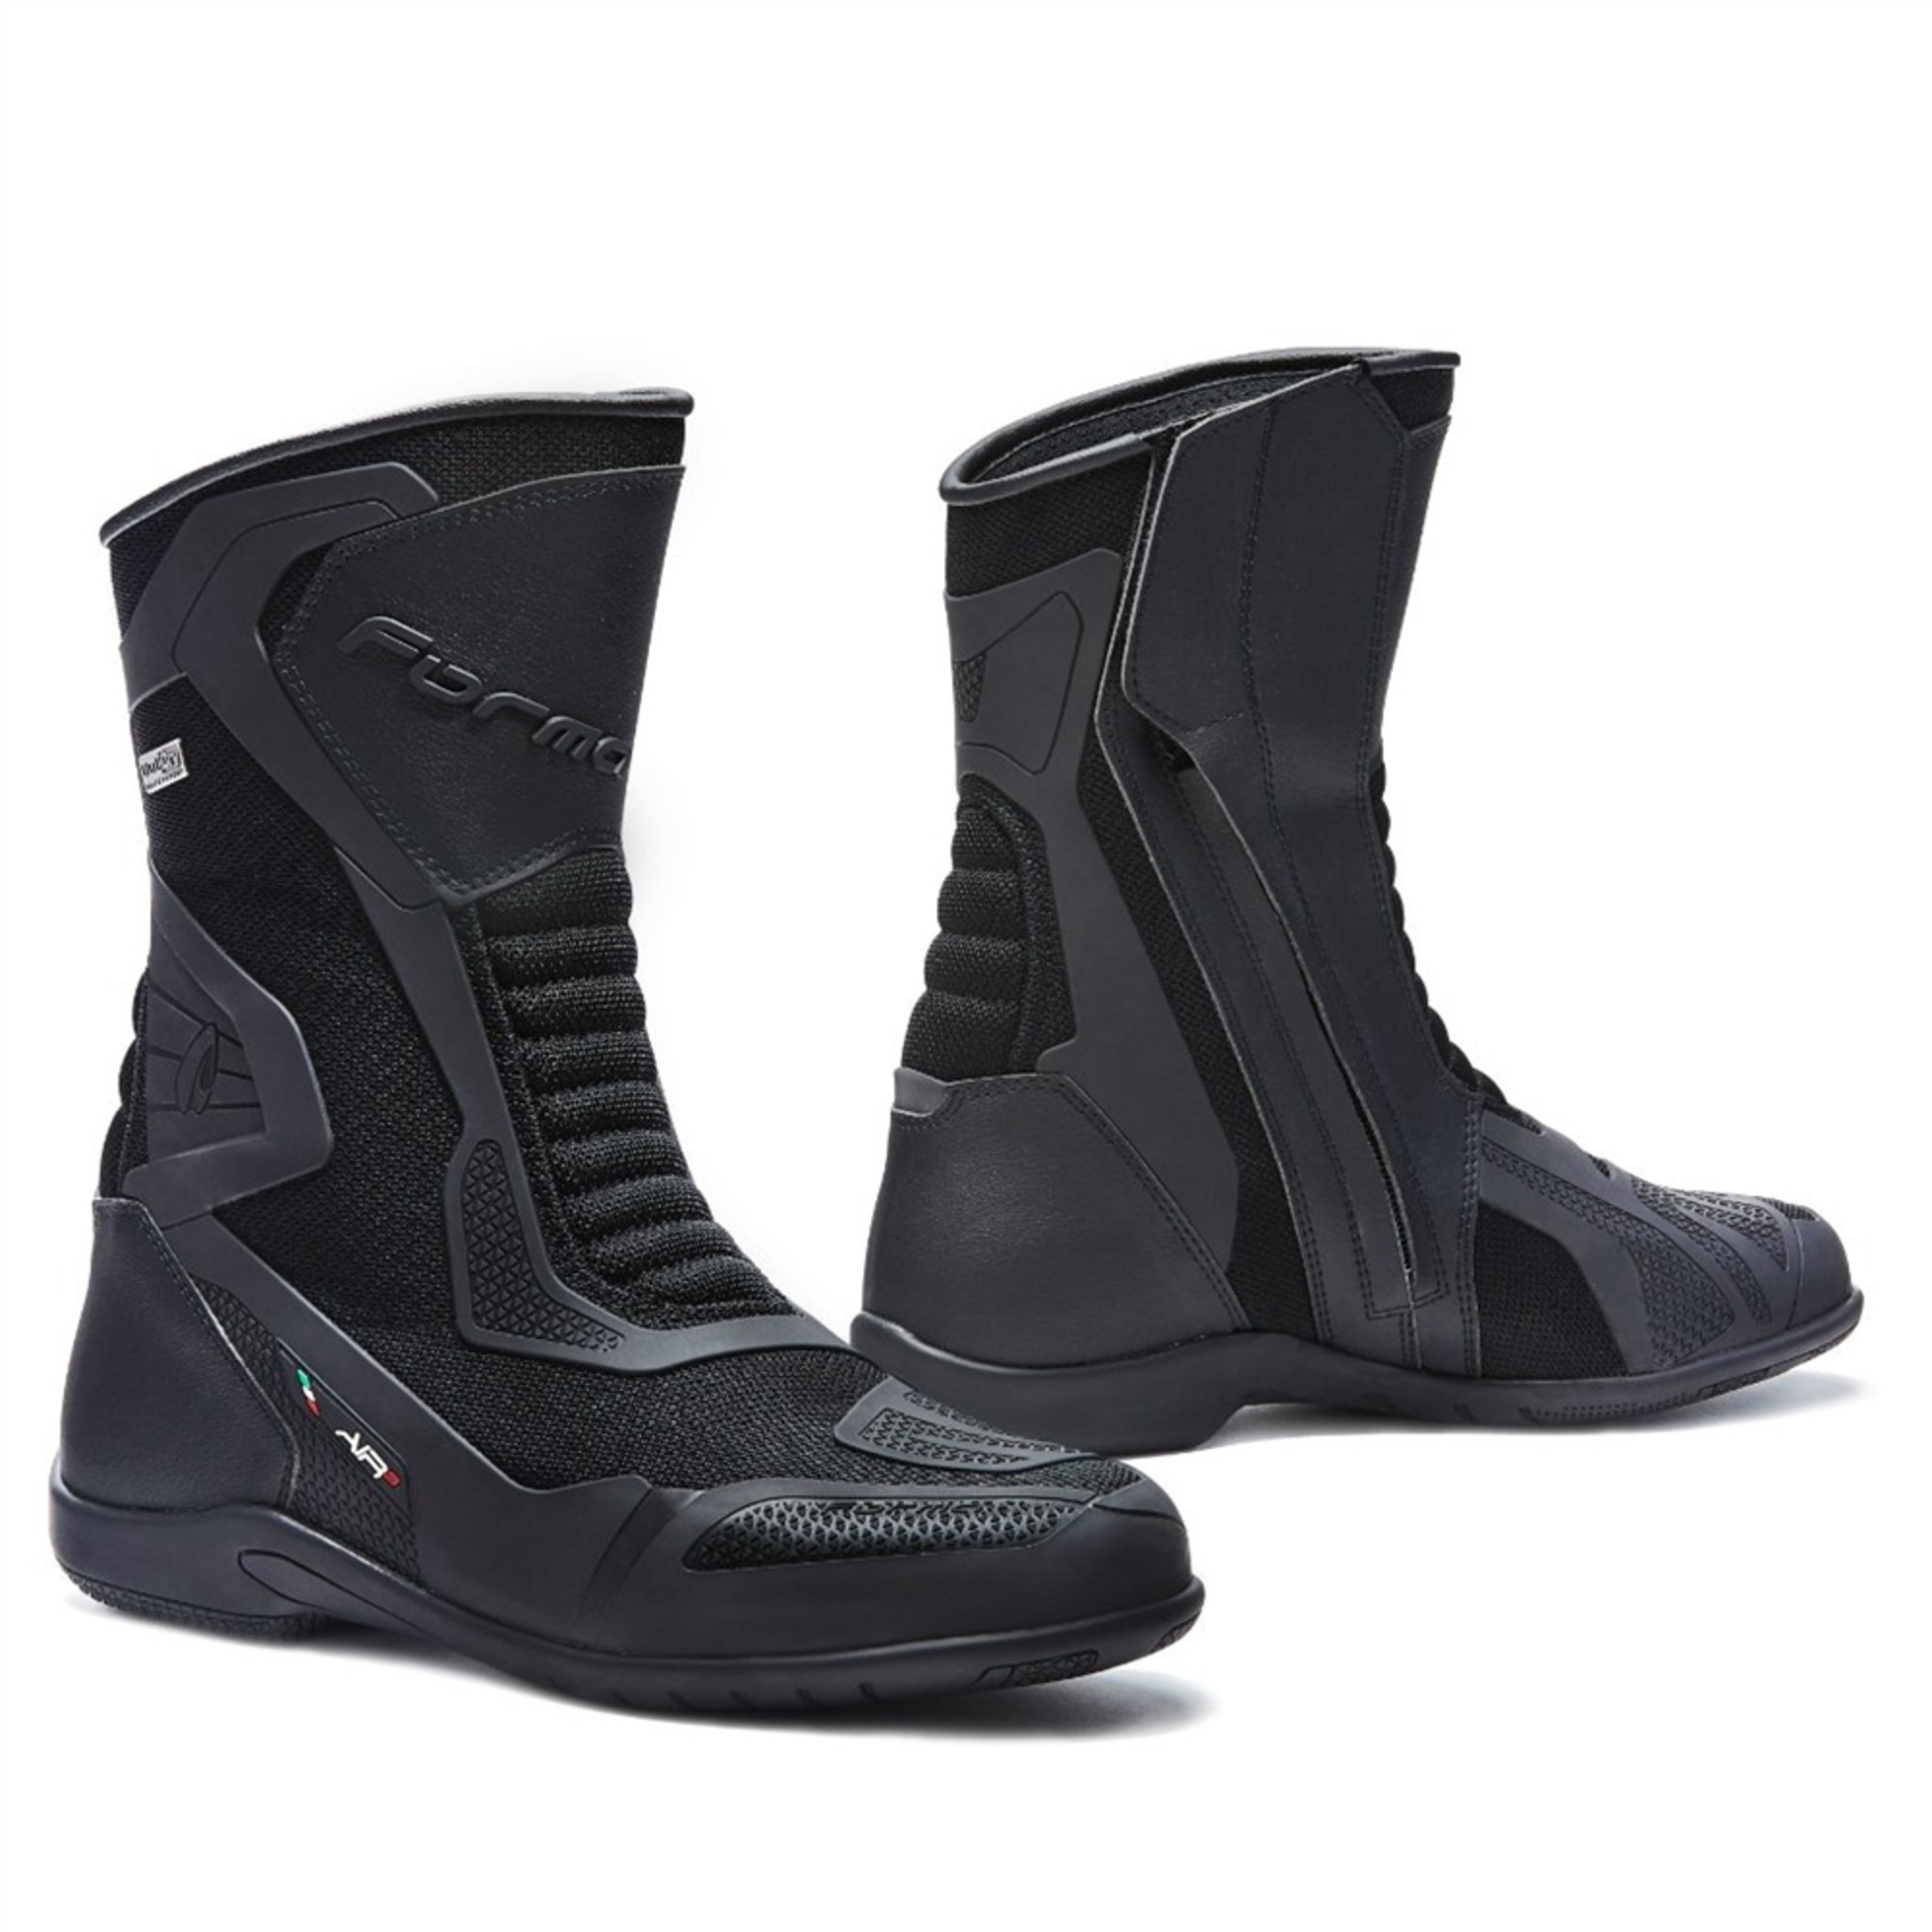 forma cruiser boots shoes adult air 3 hdry